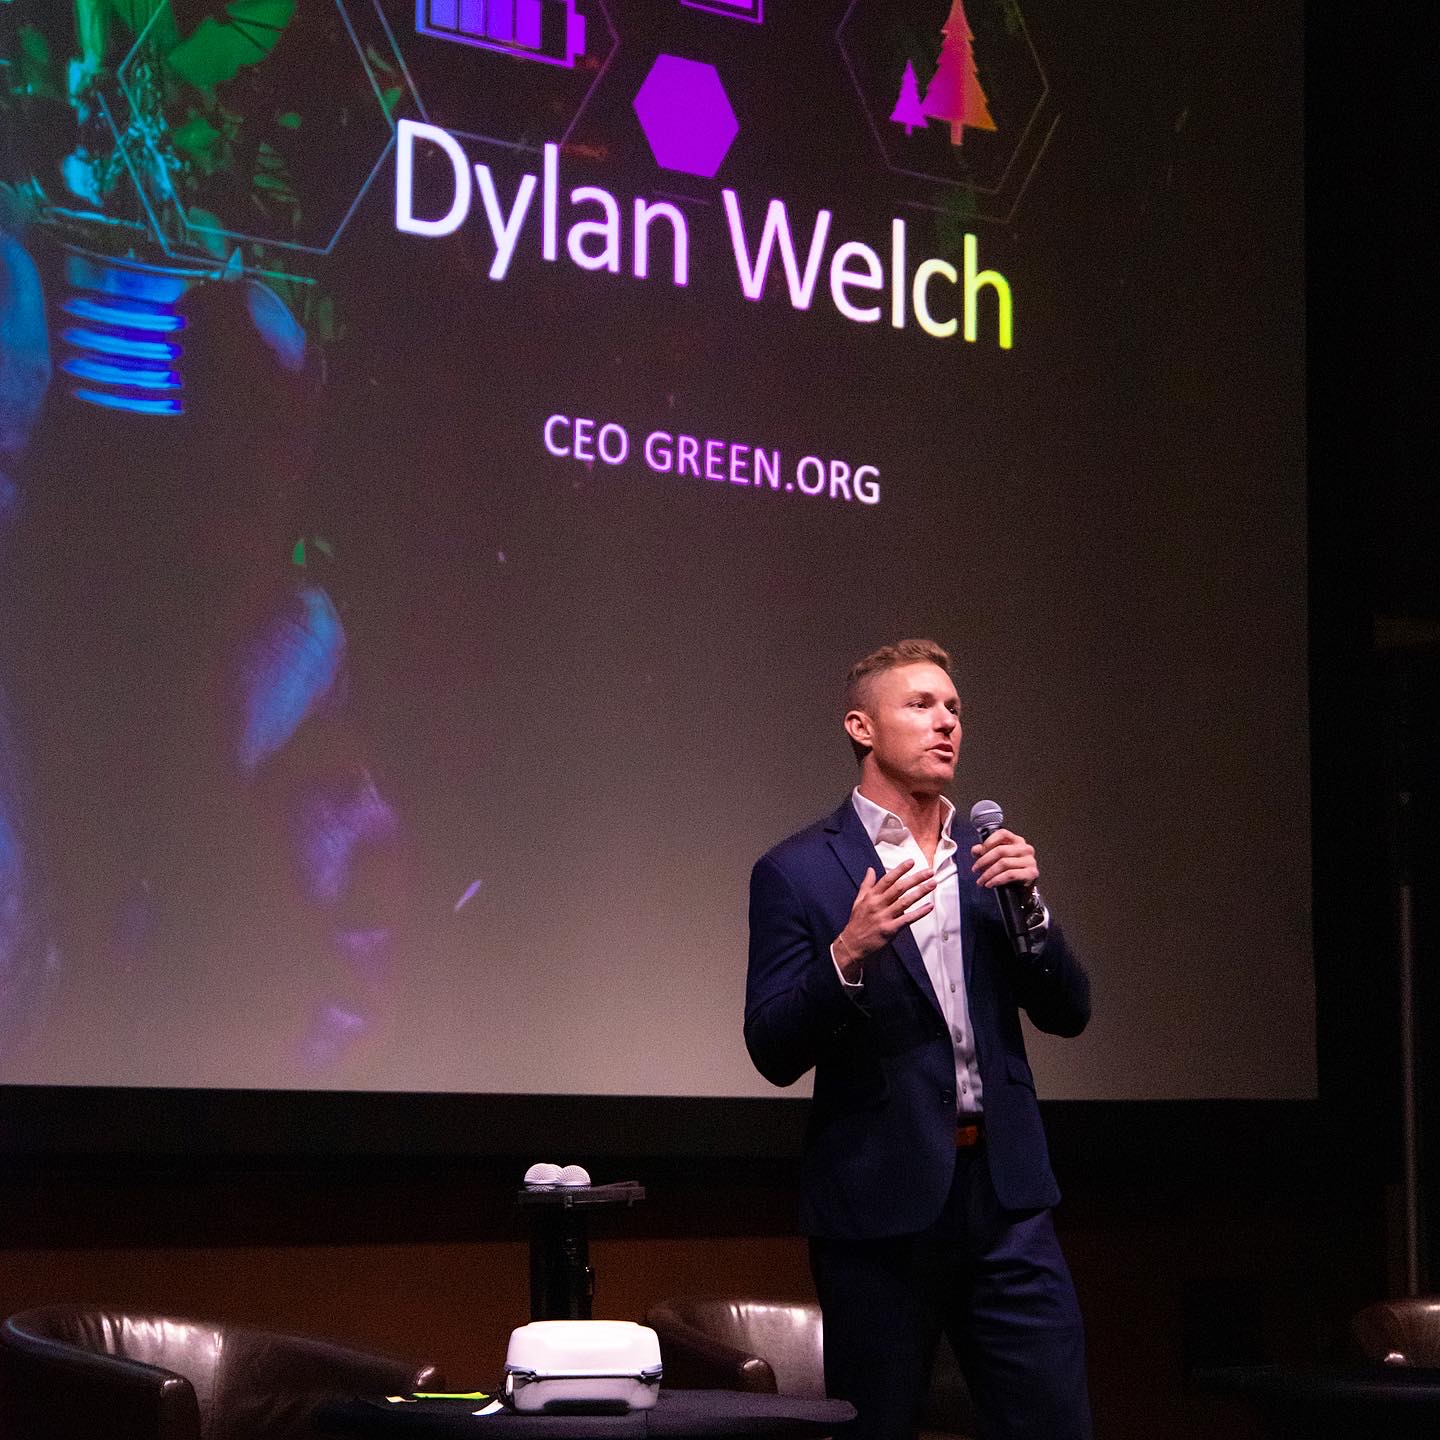 Green org Founder Dylan Welch